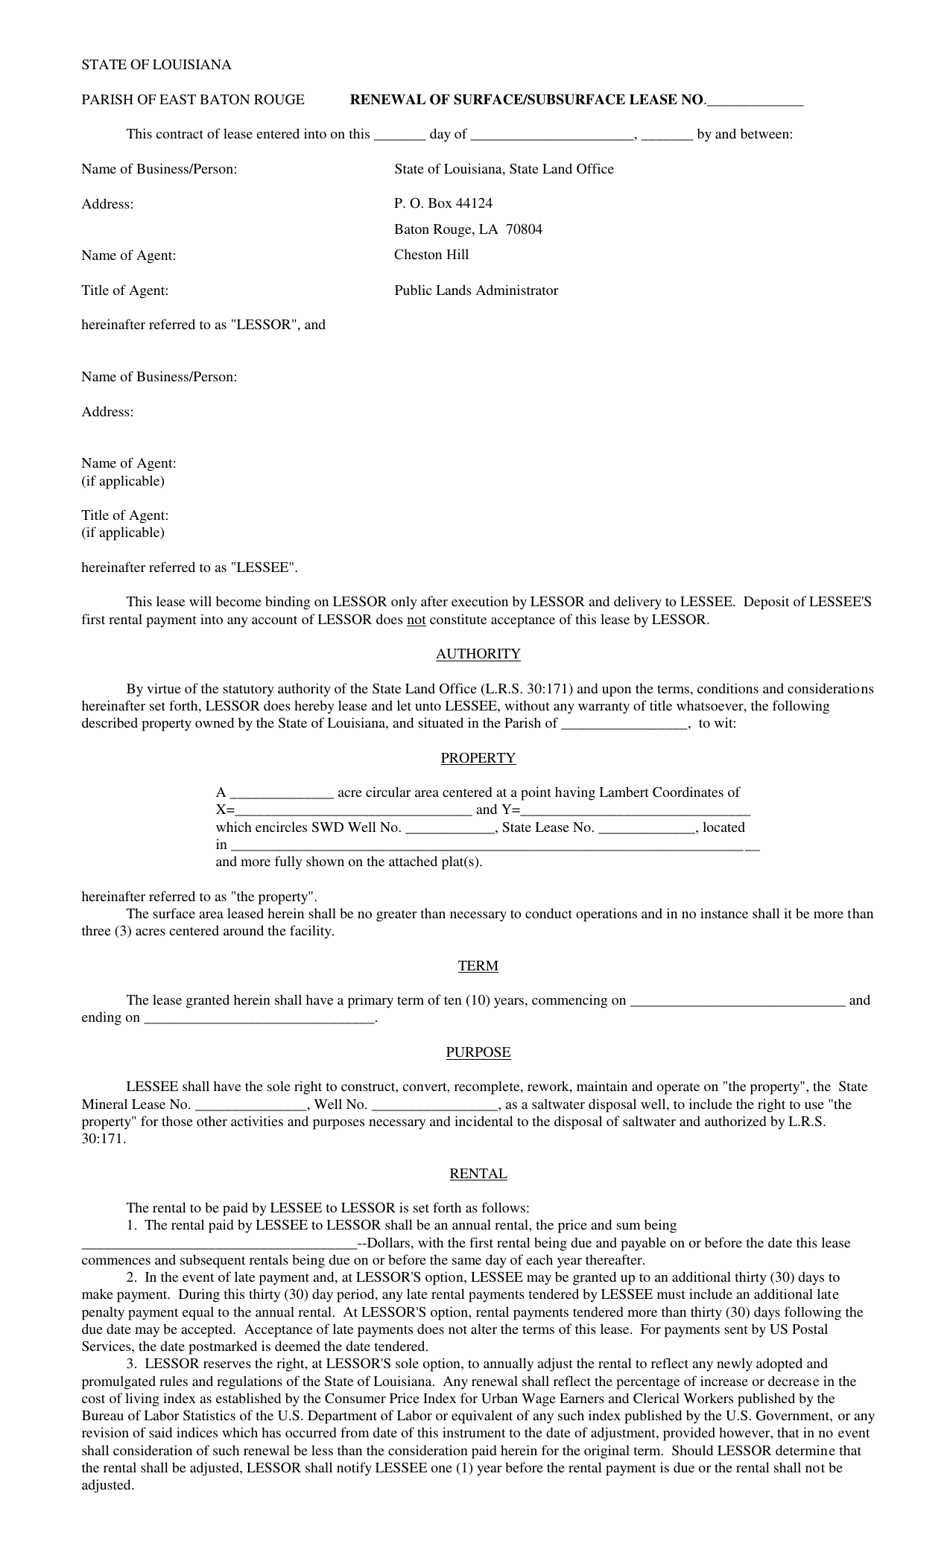 Renewal of Surface / Subsurface Lease - Louisiana, Page 1